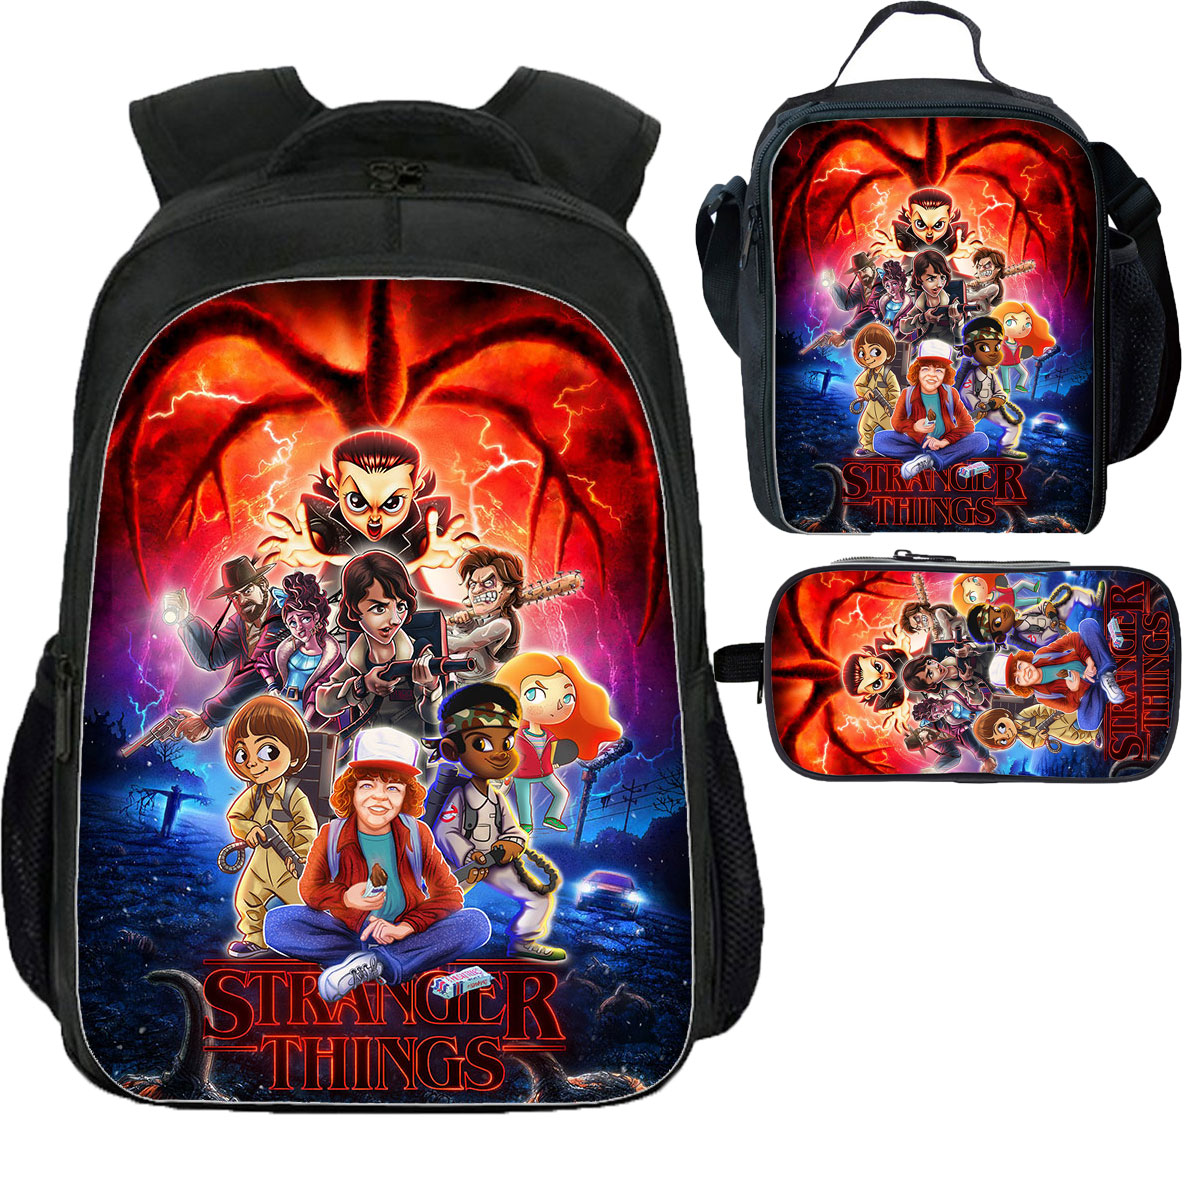 Stranger Things School Backpack Lunch Bag Pencil Case 3 Pieces 